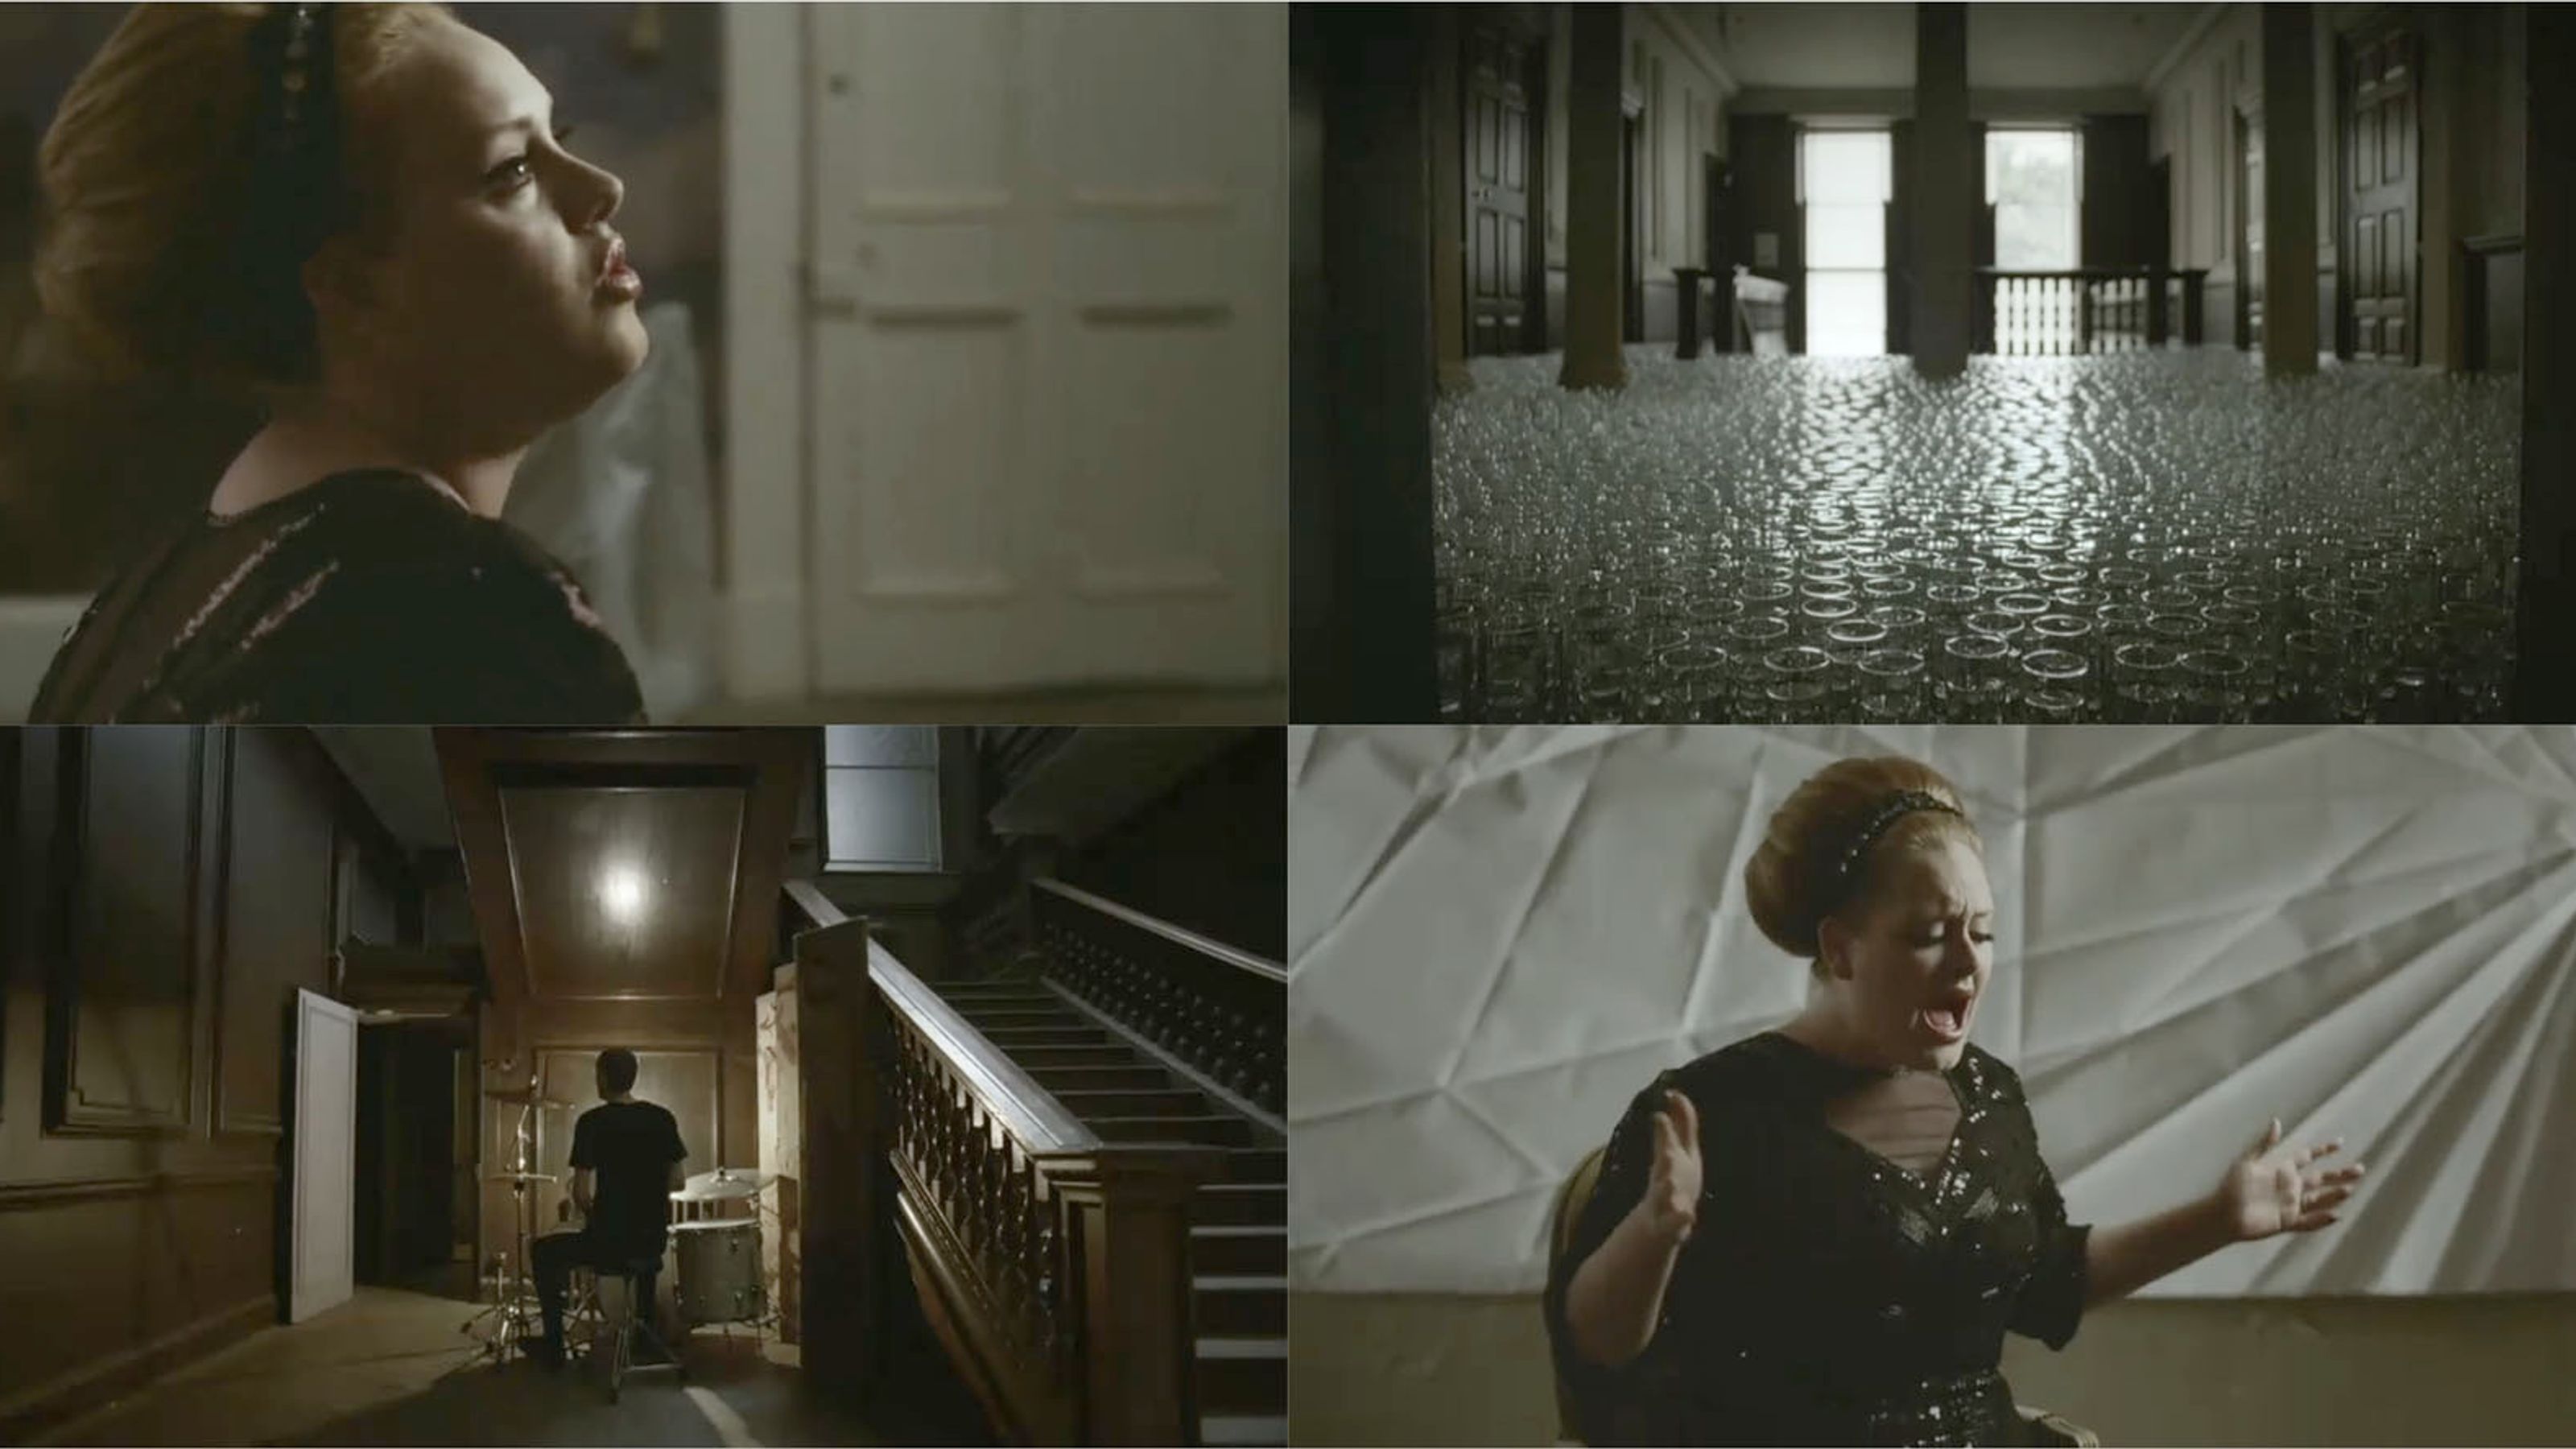 Adele “Rolling in the Deep”